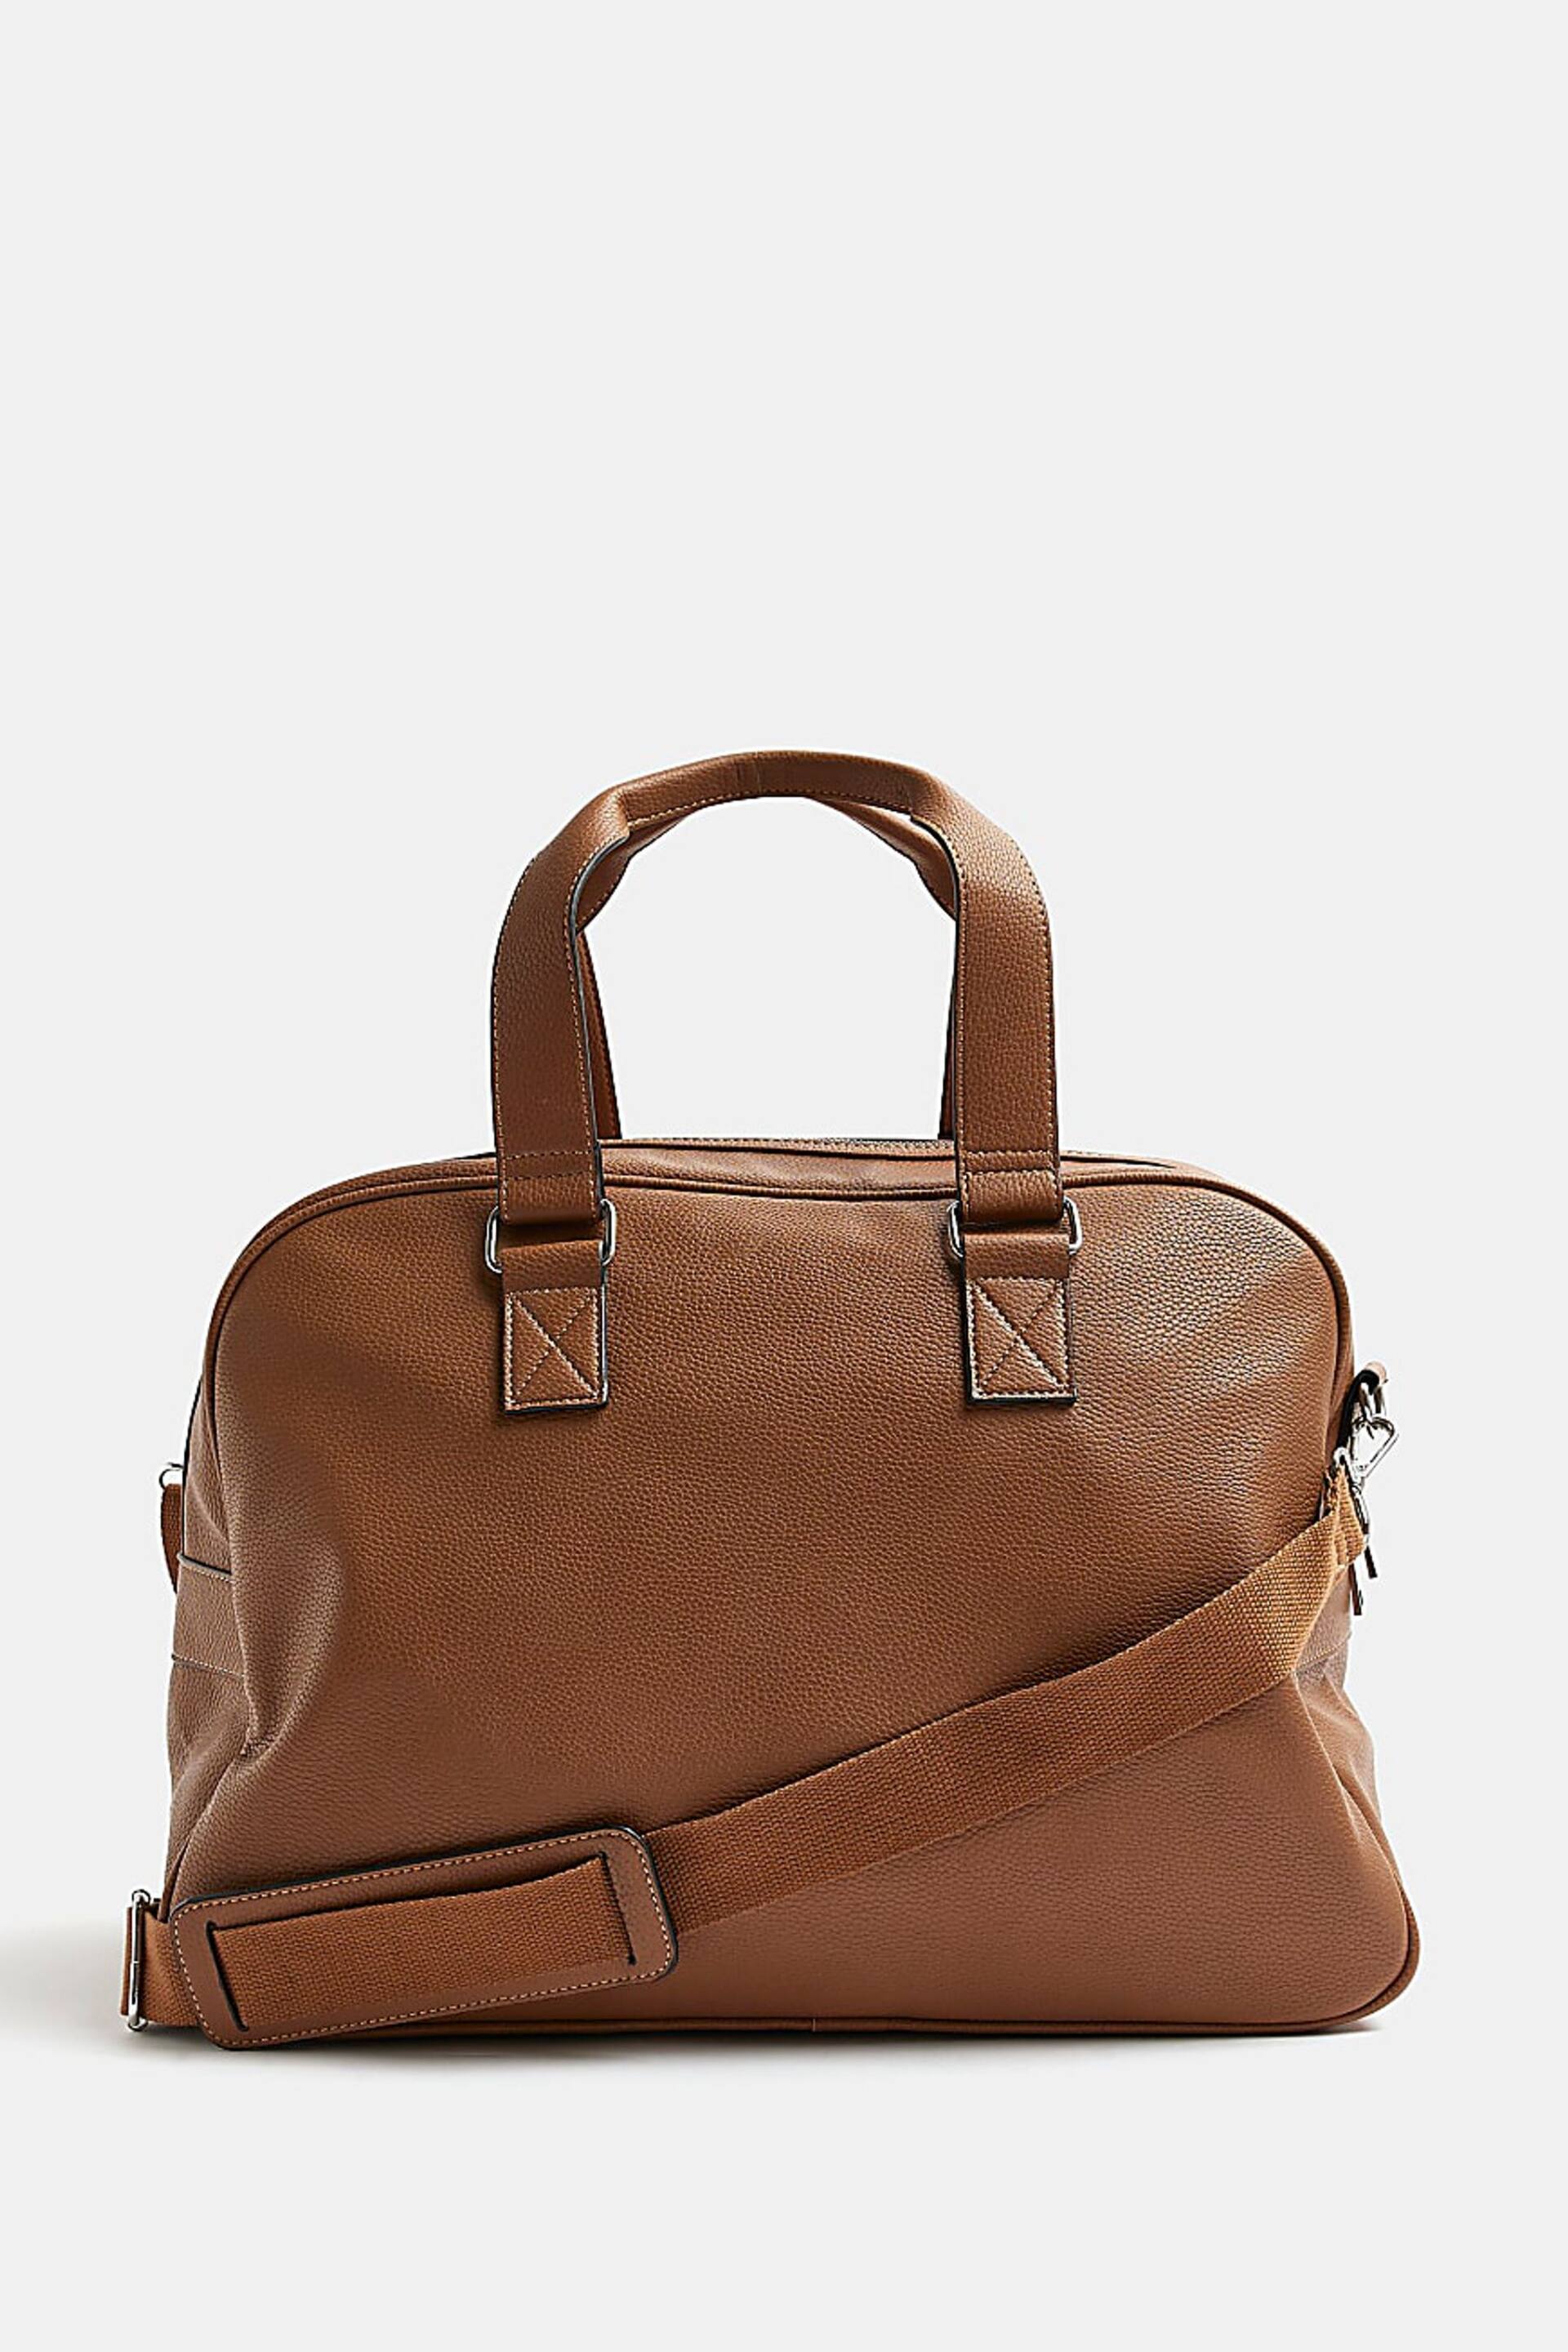 River Island Brown Light Holdall - Image 3 of 5